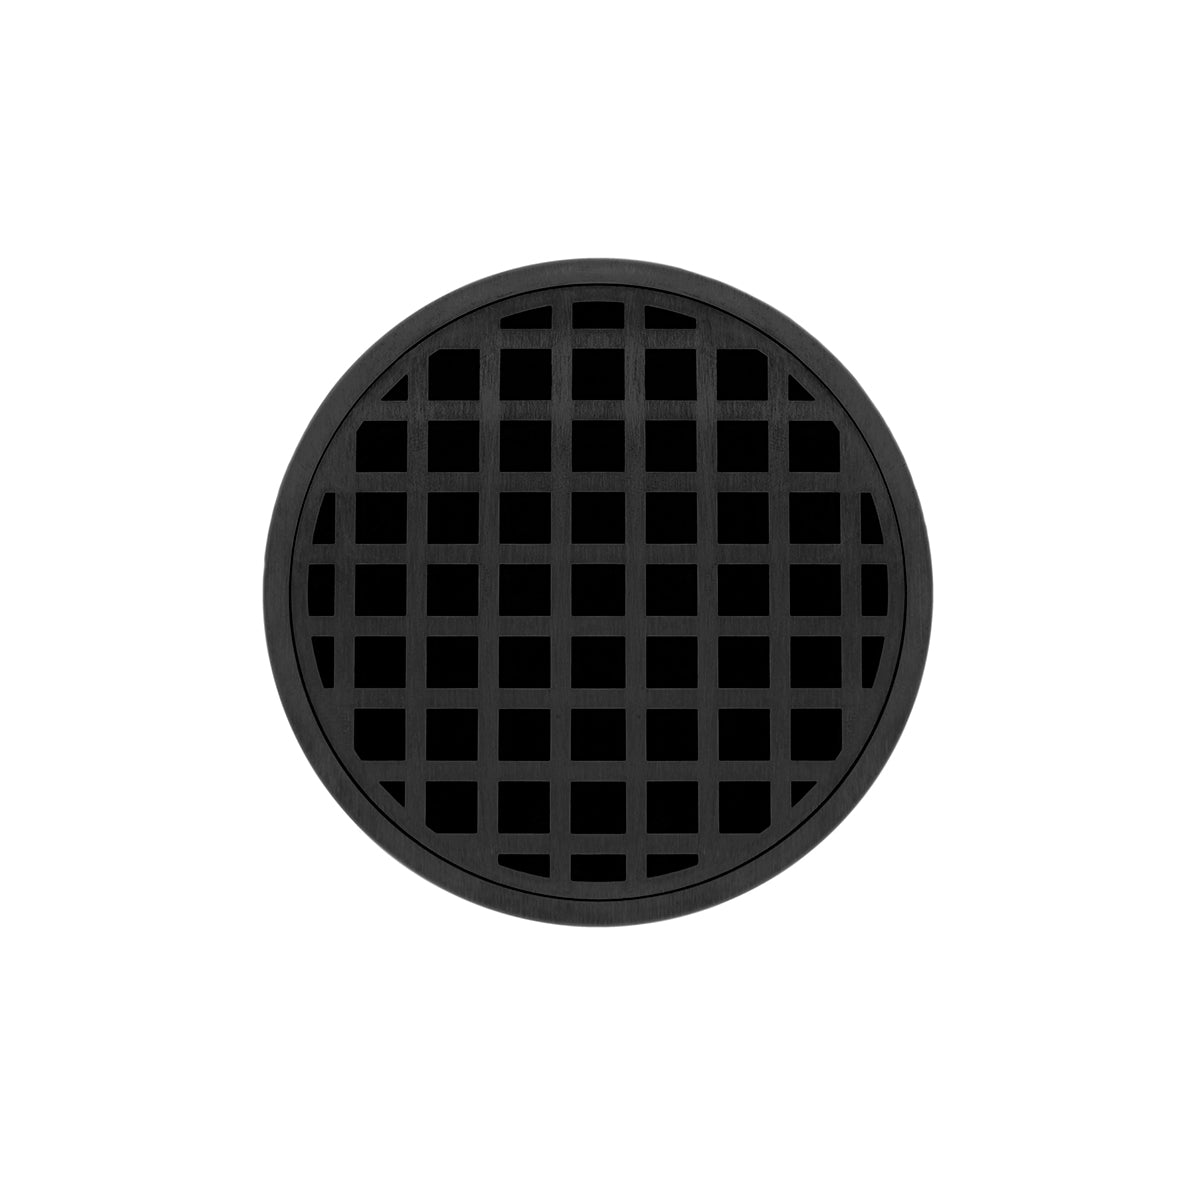 Infinity Drain 5" Round RQDB 5 Premium Center Drain Kit with Squares Pattern Decorative Plate with ABS Bonded Flange Drain Body, 2", 3" and 4" Outlet